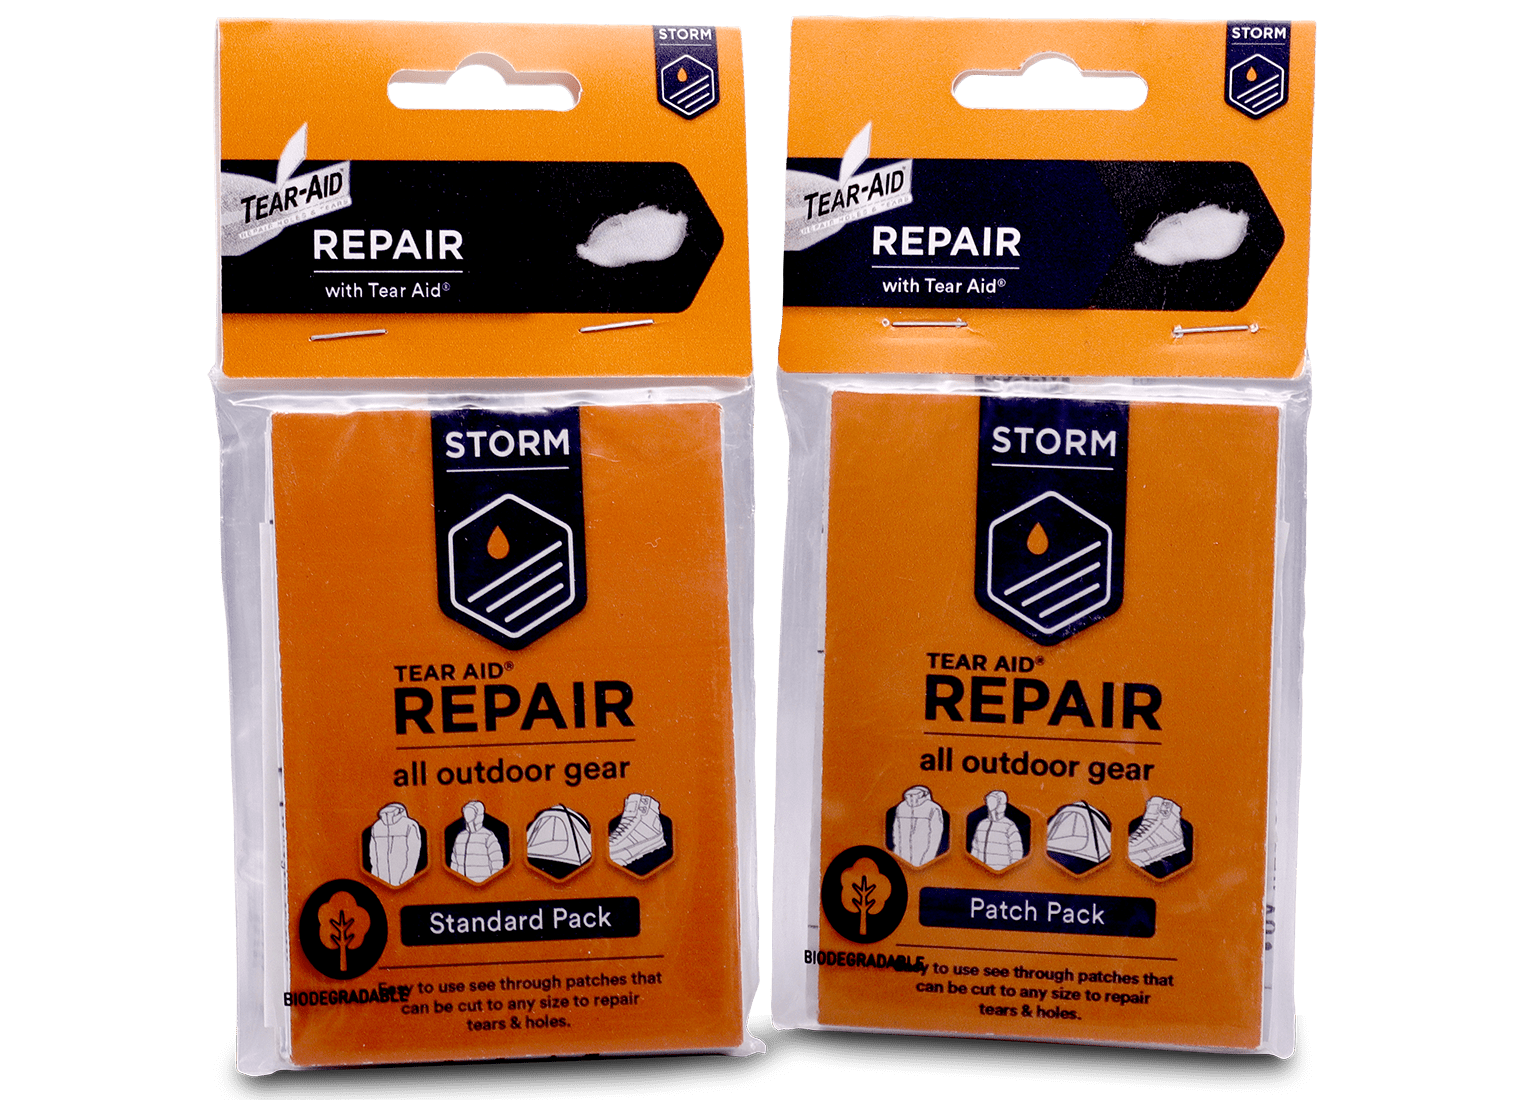 Storm Care Tear Aid Repair Patch Pack